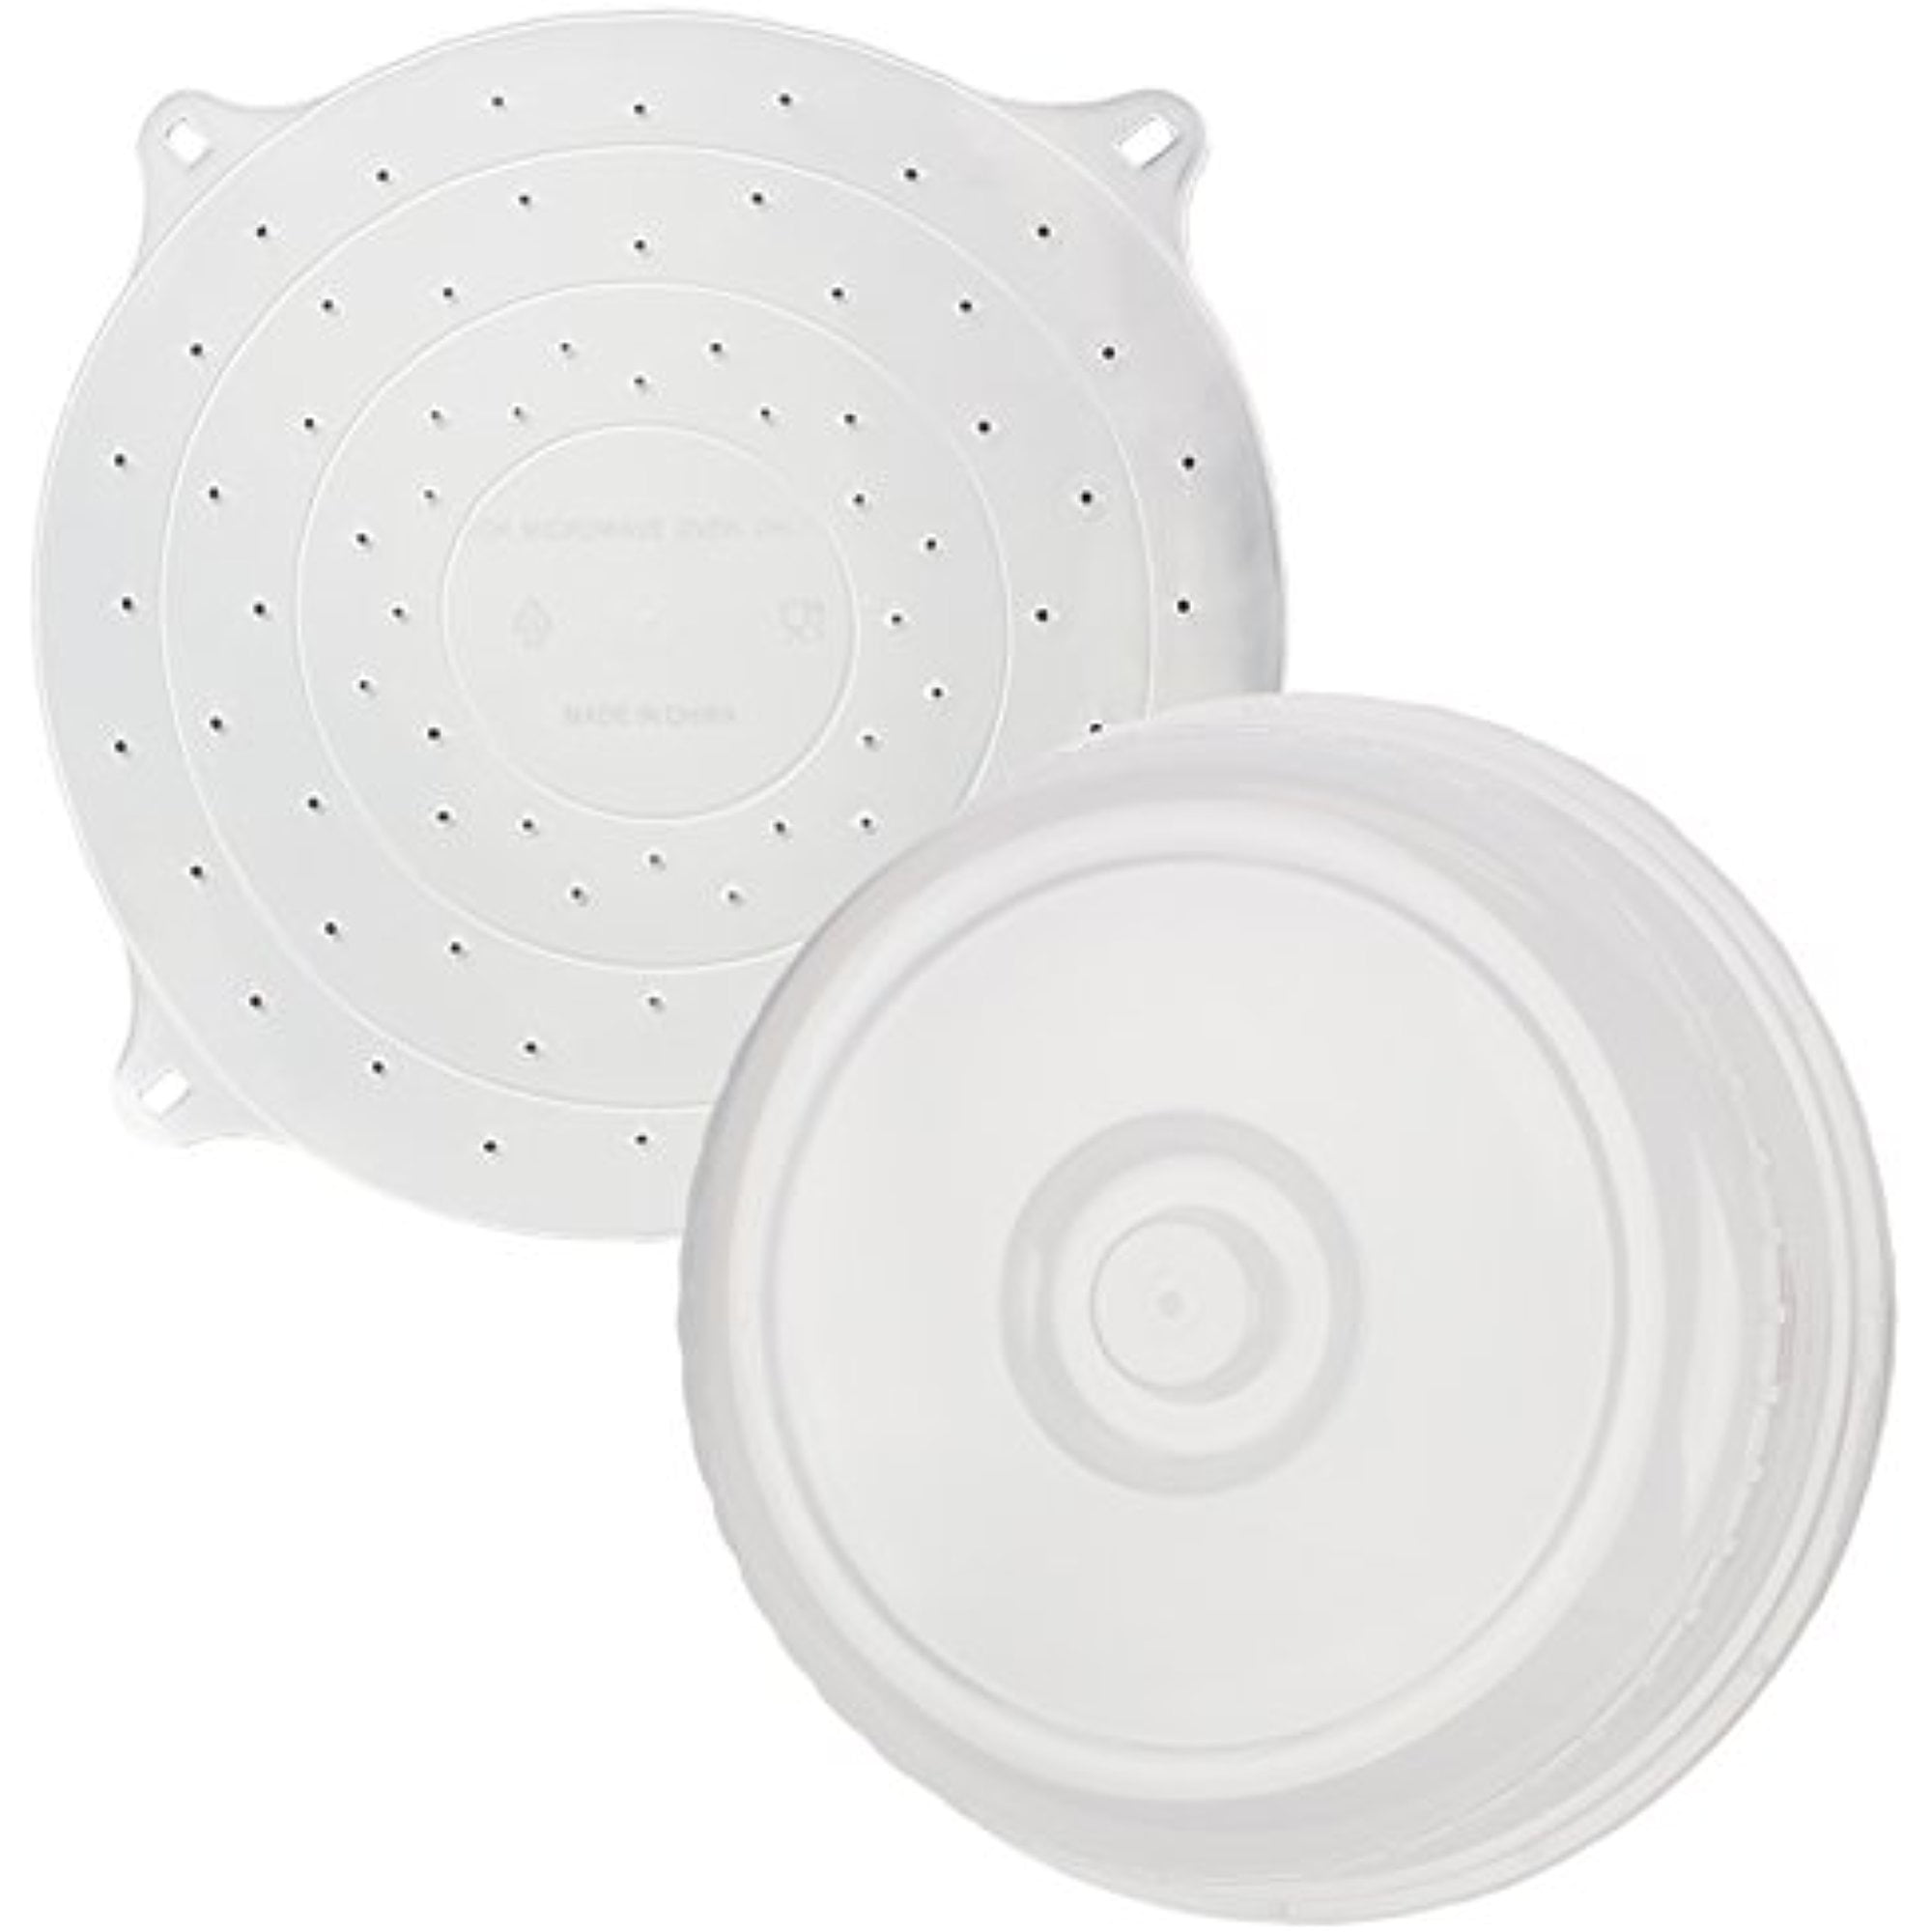 Goferoy Microwave Splatter Cover,Glass Microwave Cover for Food BPA Free,118 Inches Foldable Microwave Plate Cover Silicone Splash Guard